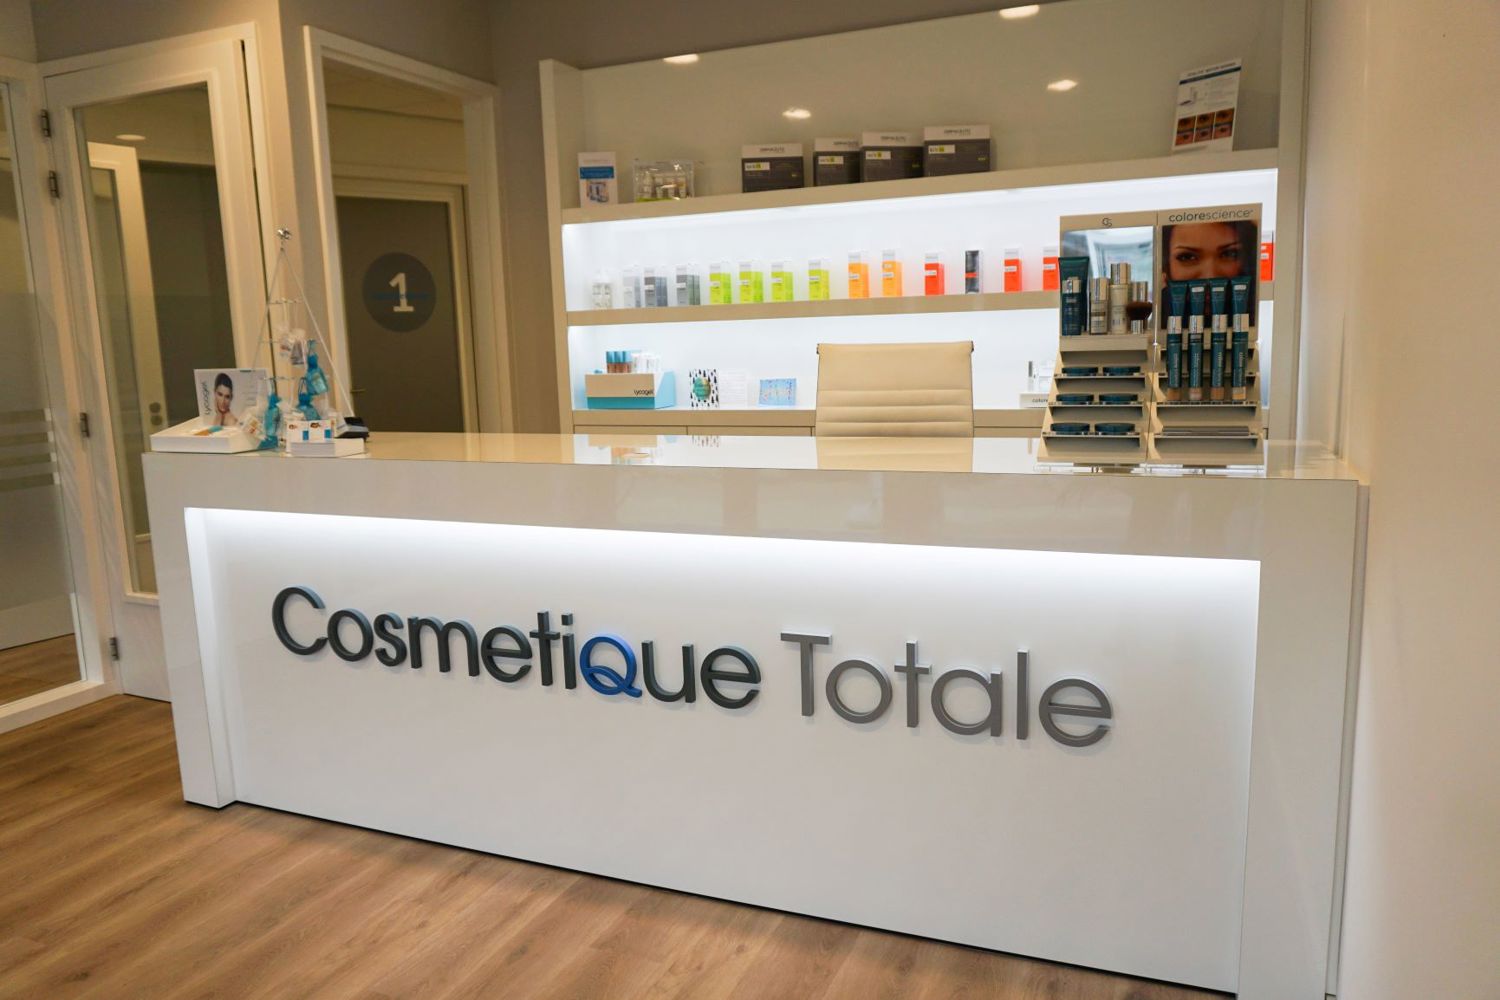 Cosmetique Totale Eindhoven (2)